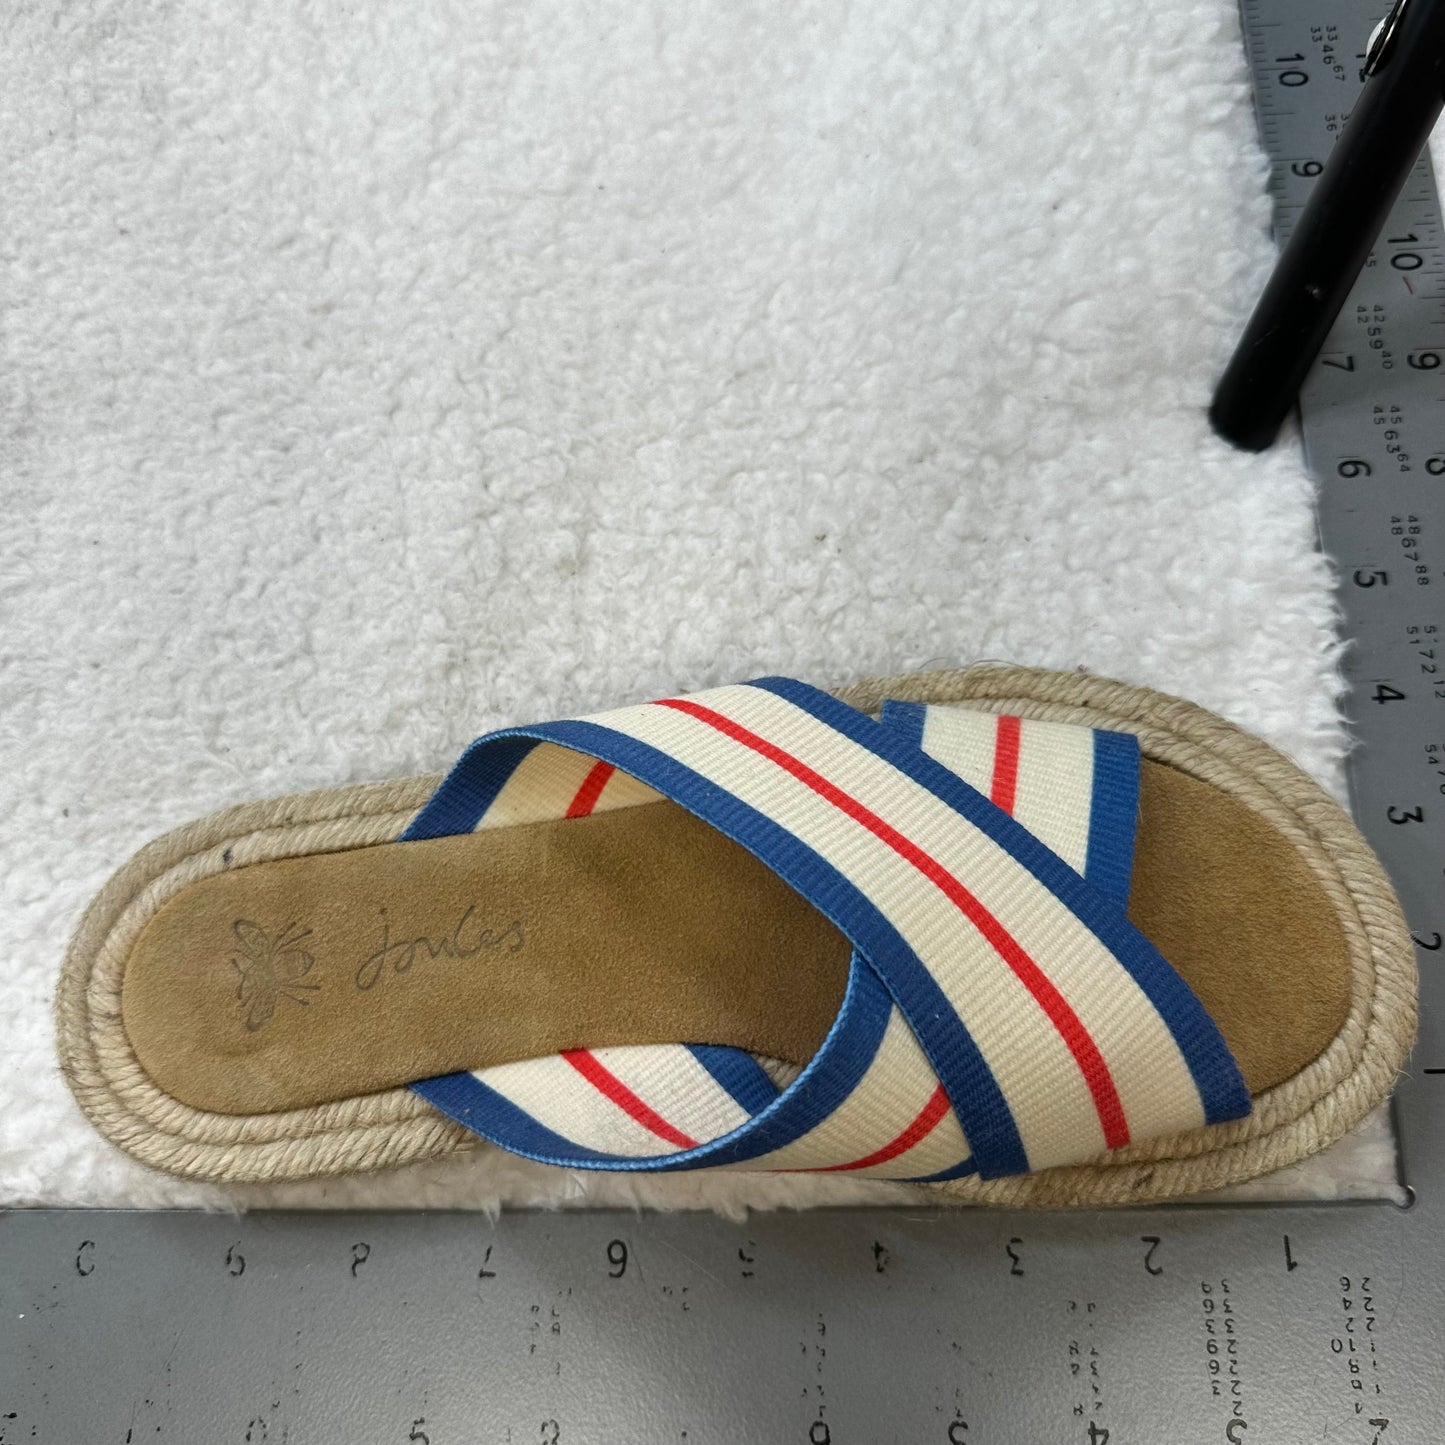 Ivory Sandals Flats Joules, Size 7